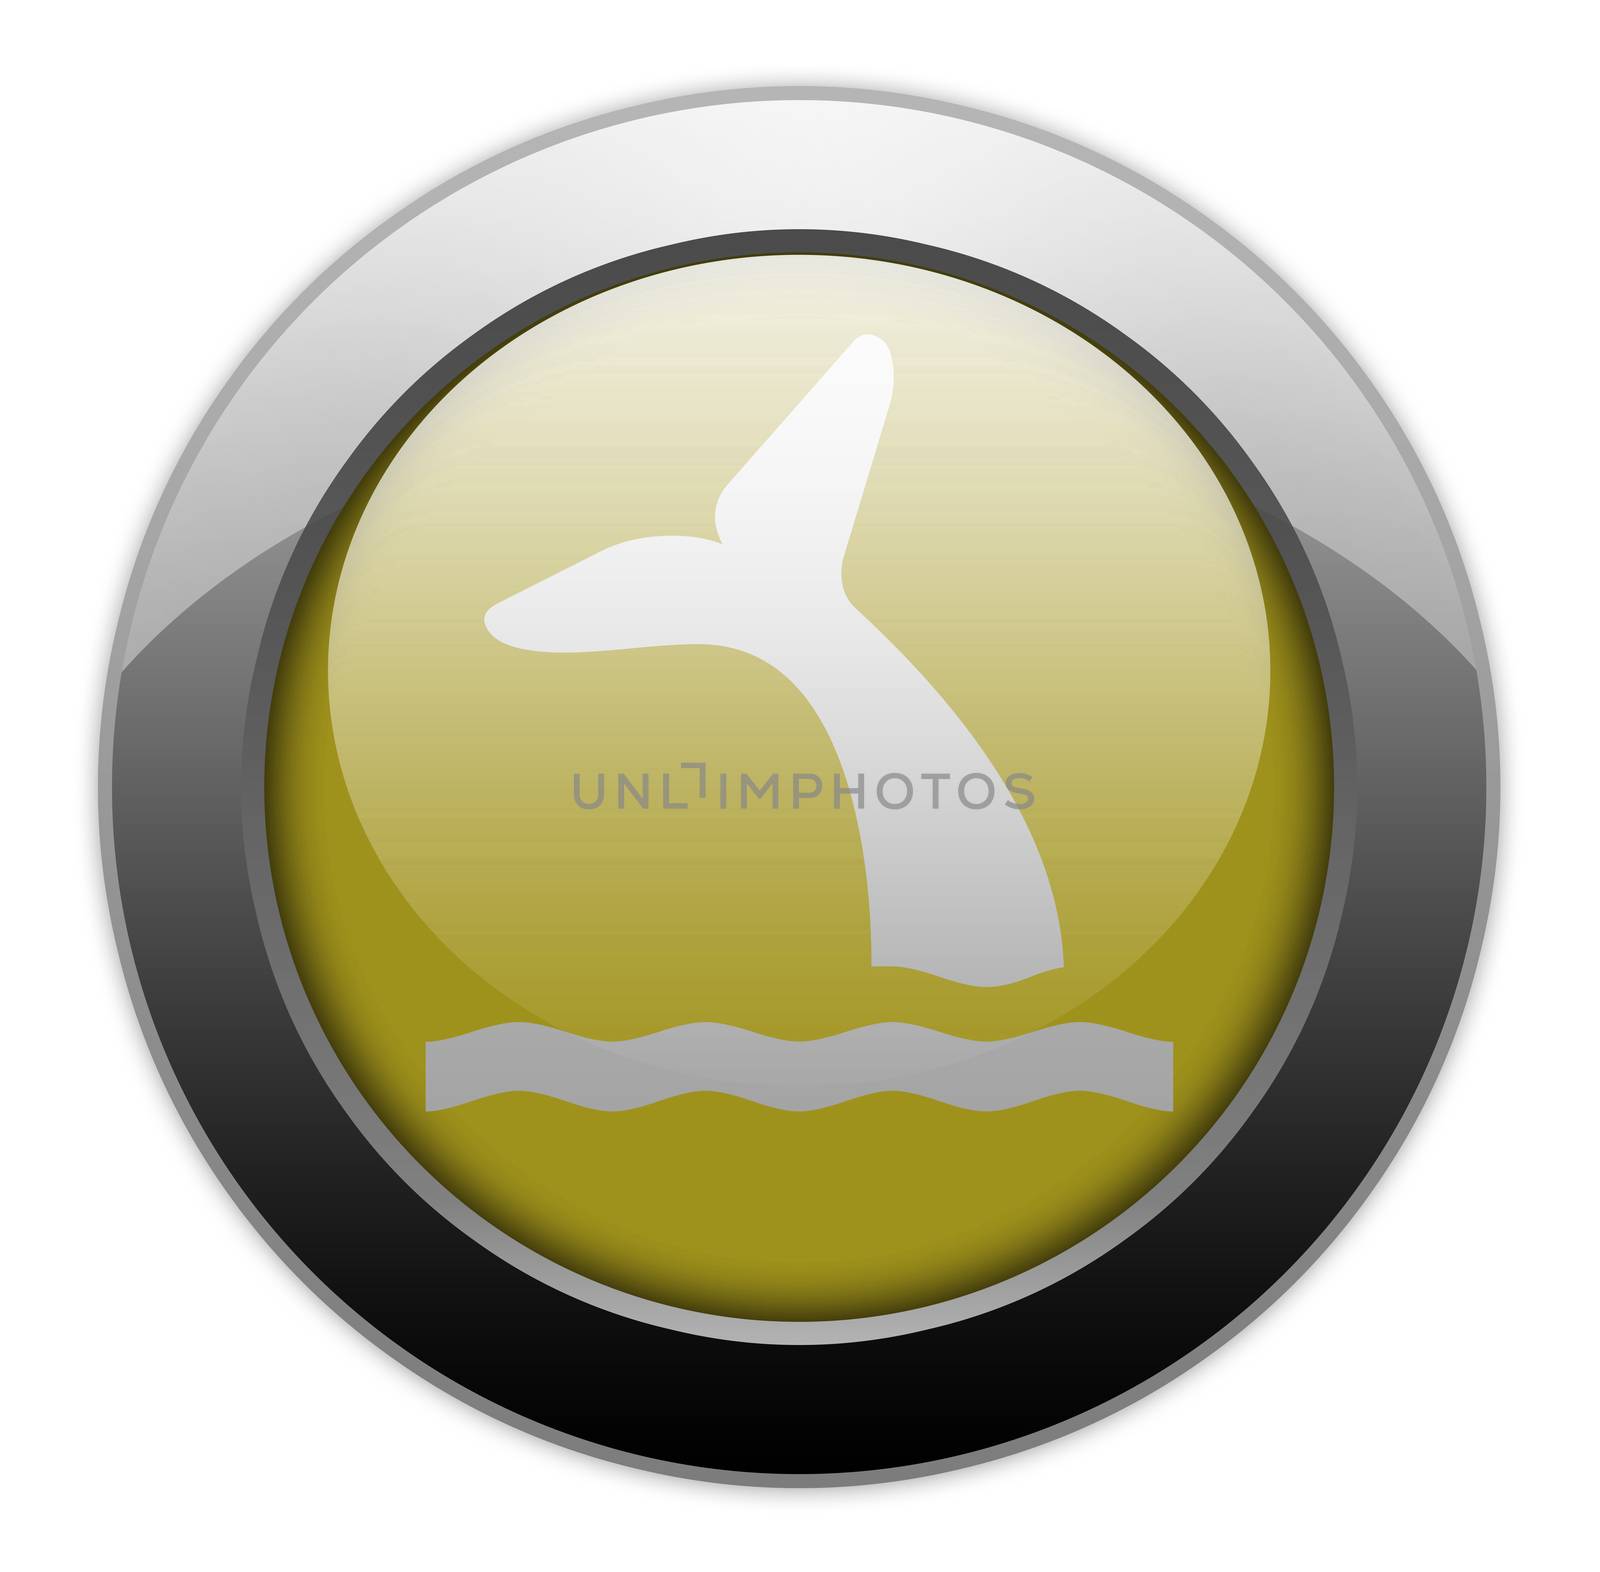 Icon, Button, Pictogram with Whale symbol